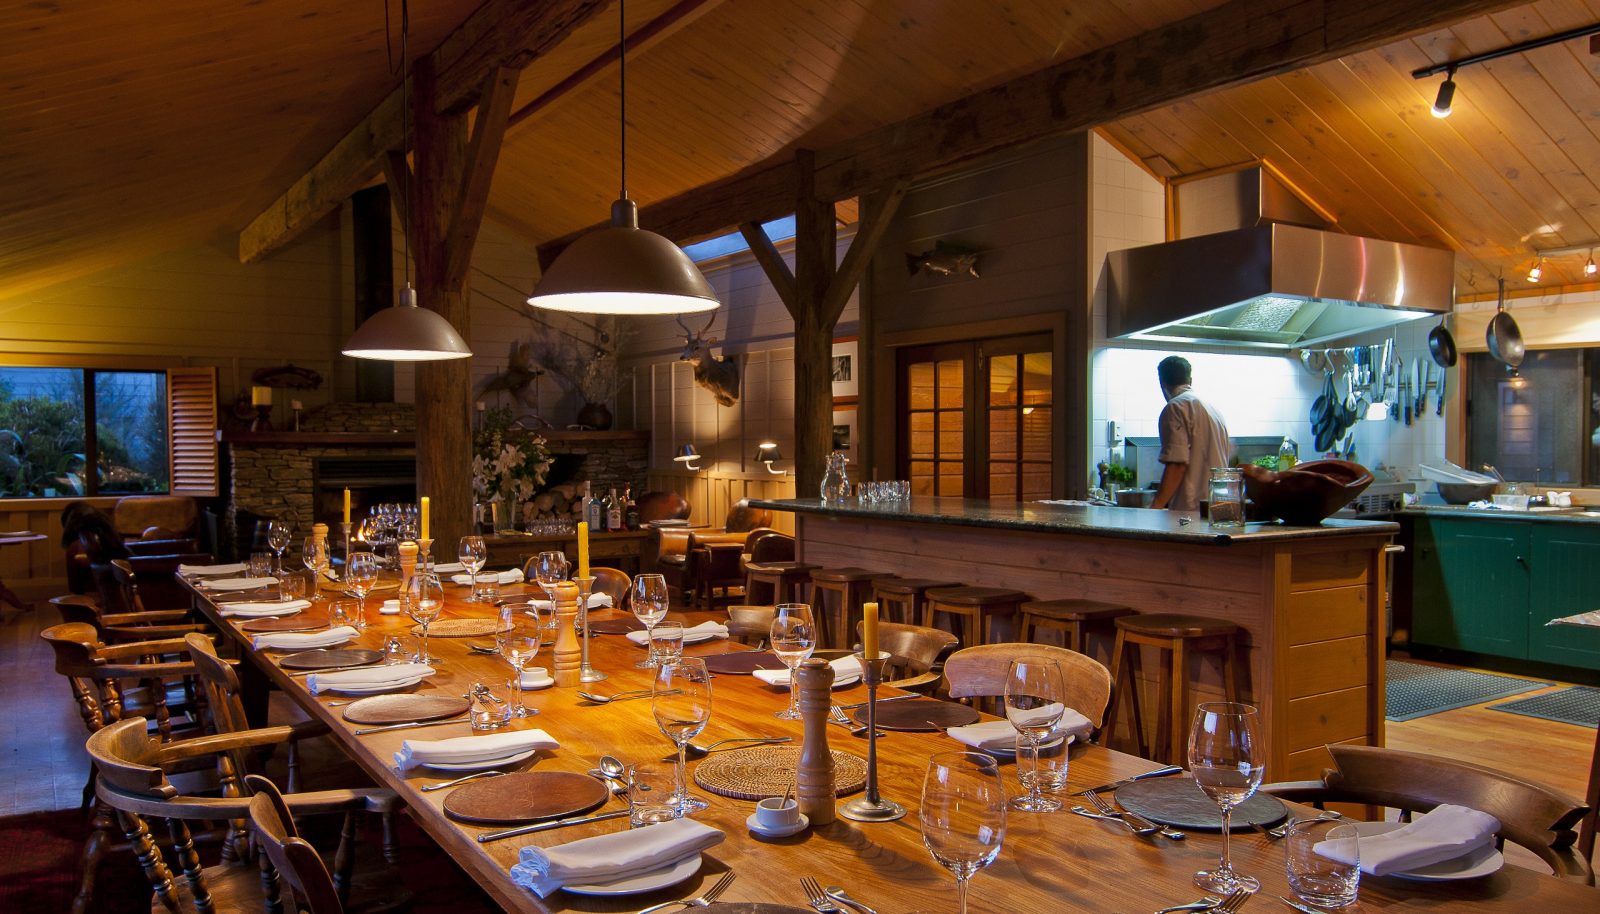 The dining table at Poronui Lodge